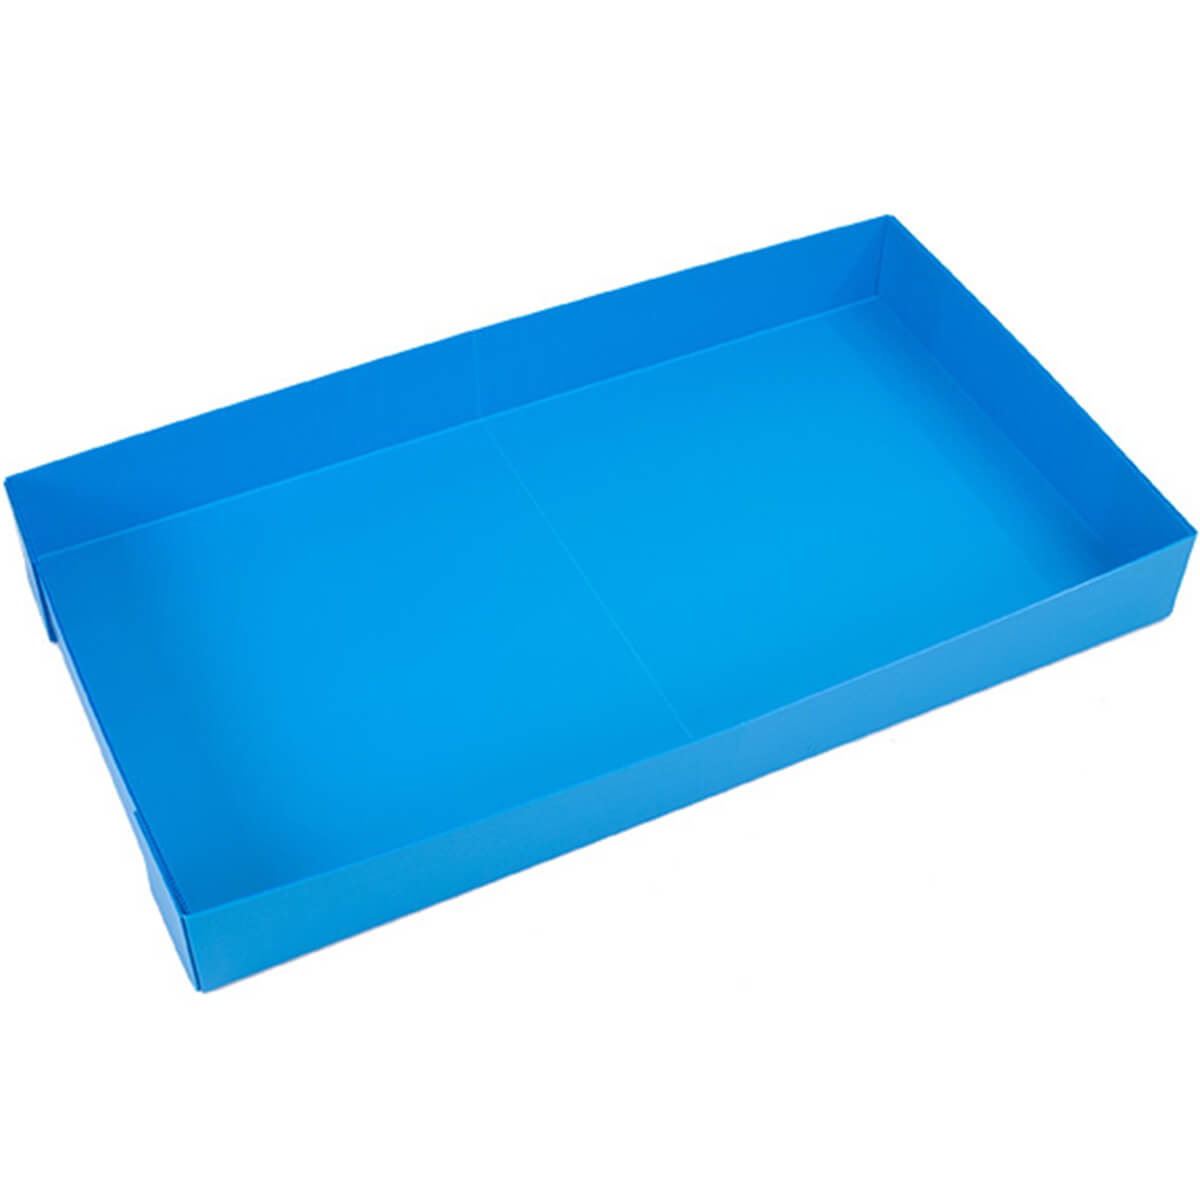 coroplast tray for guinea pig cage